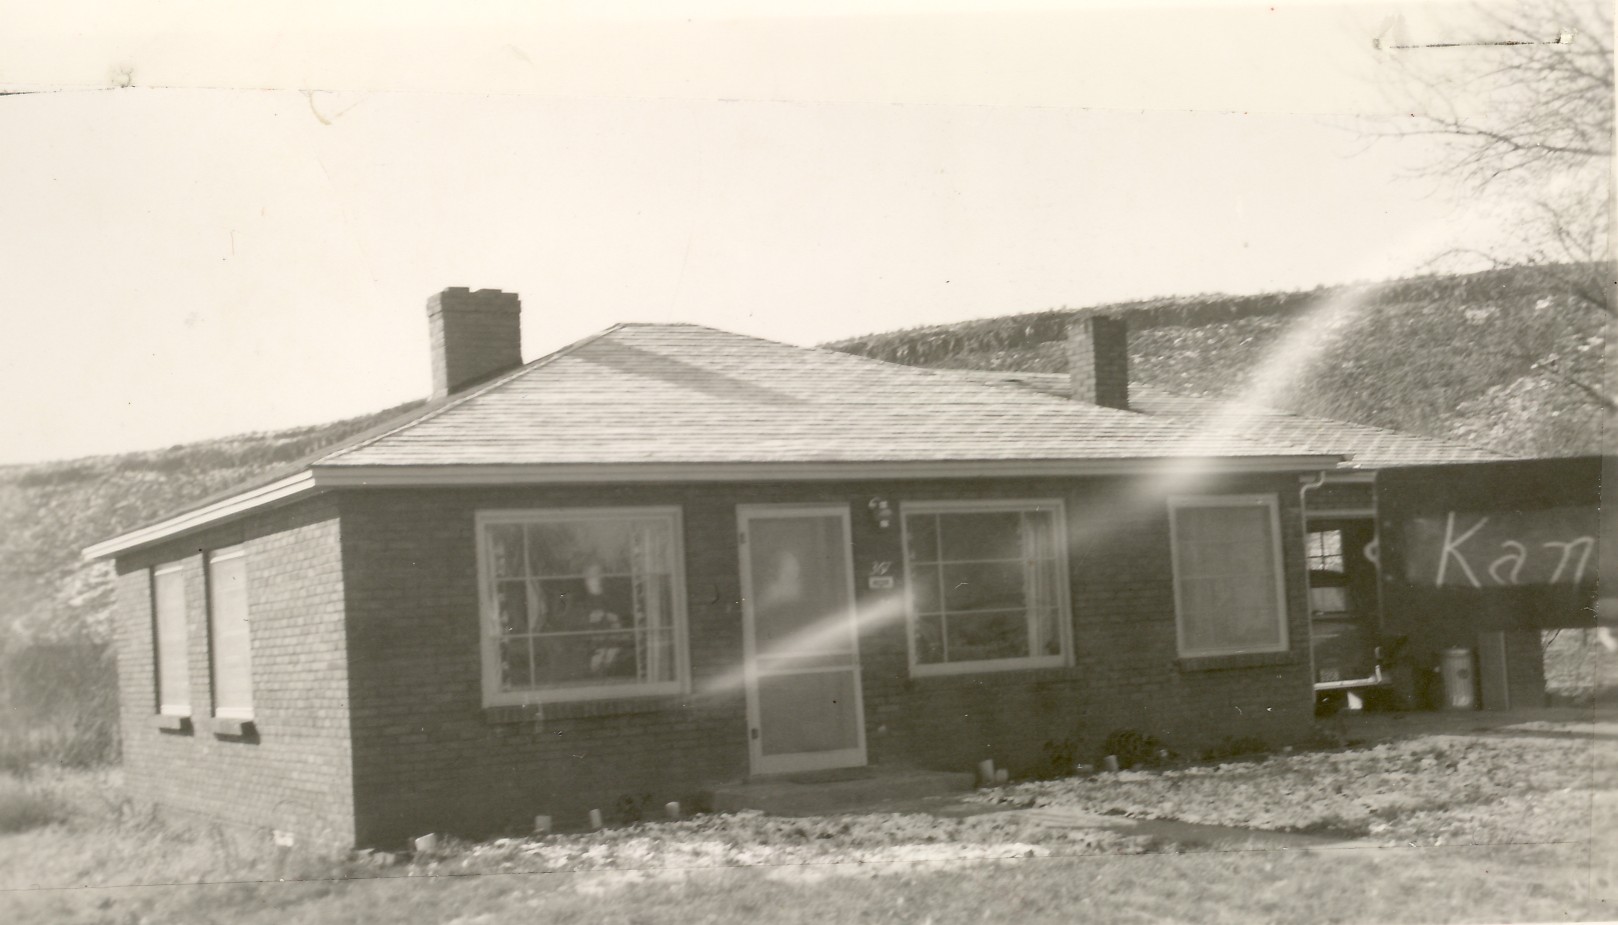 Photo of a house at an unknown location